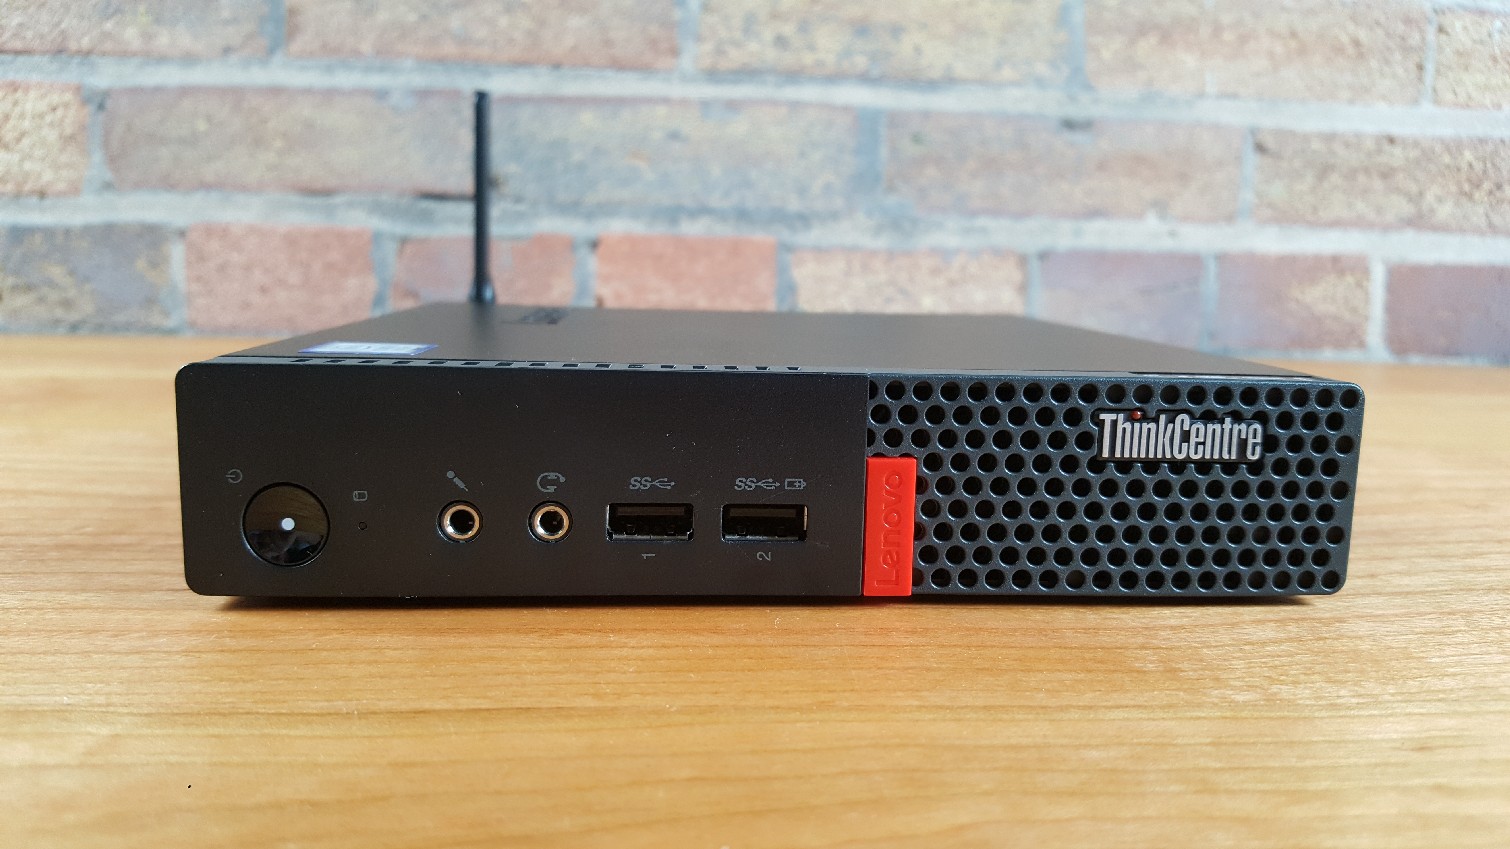 Lenovo ThinkCentre M Series Tiny: Big Performance in a Small